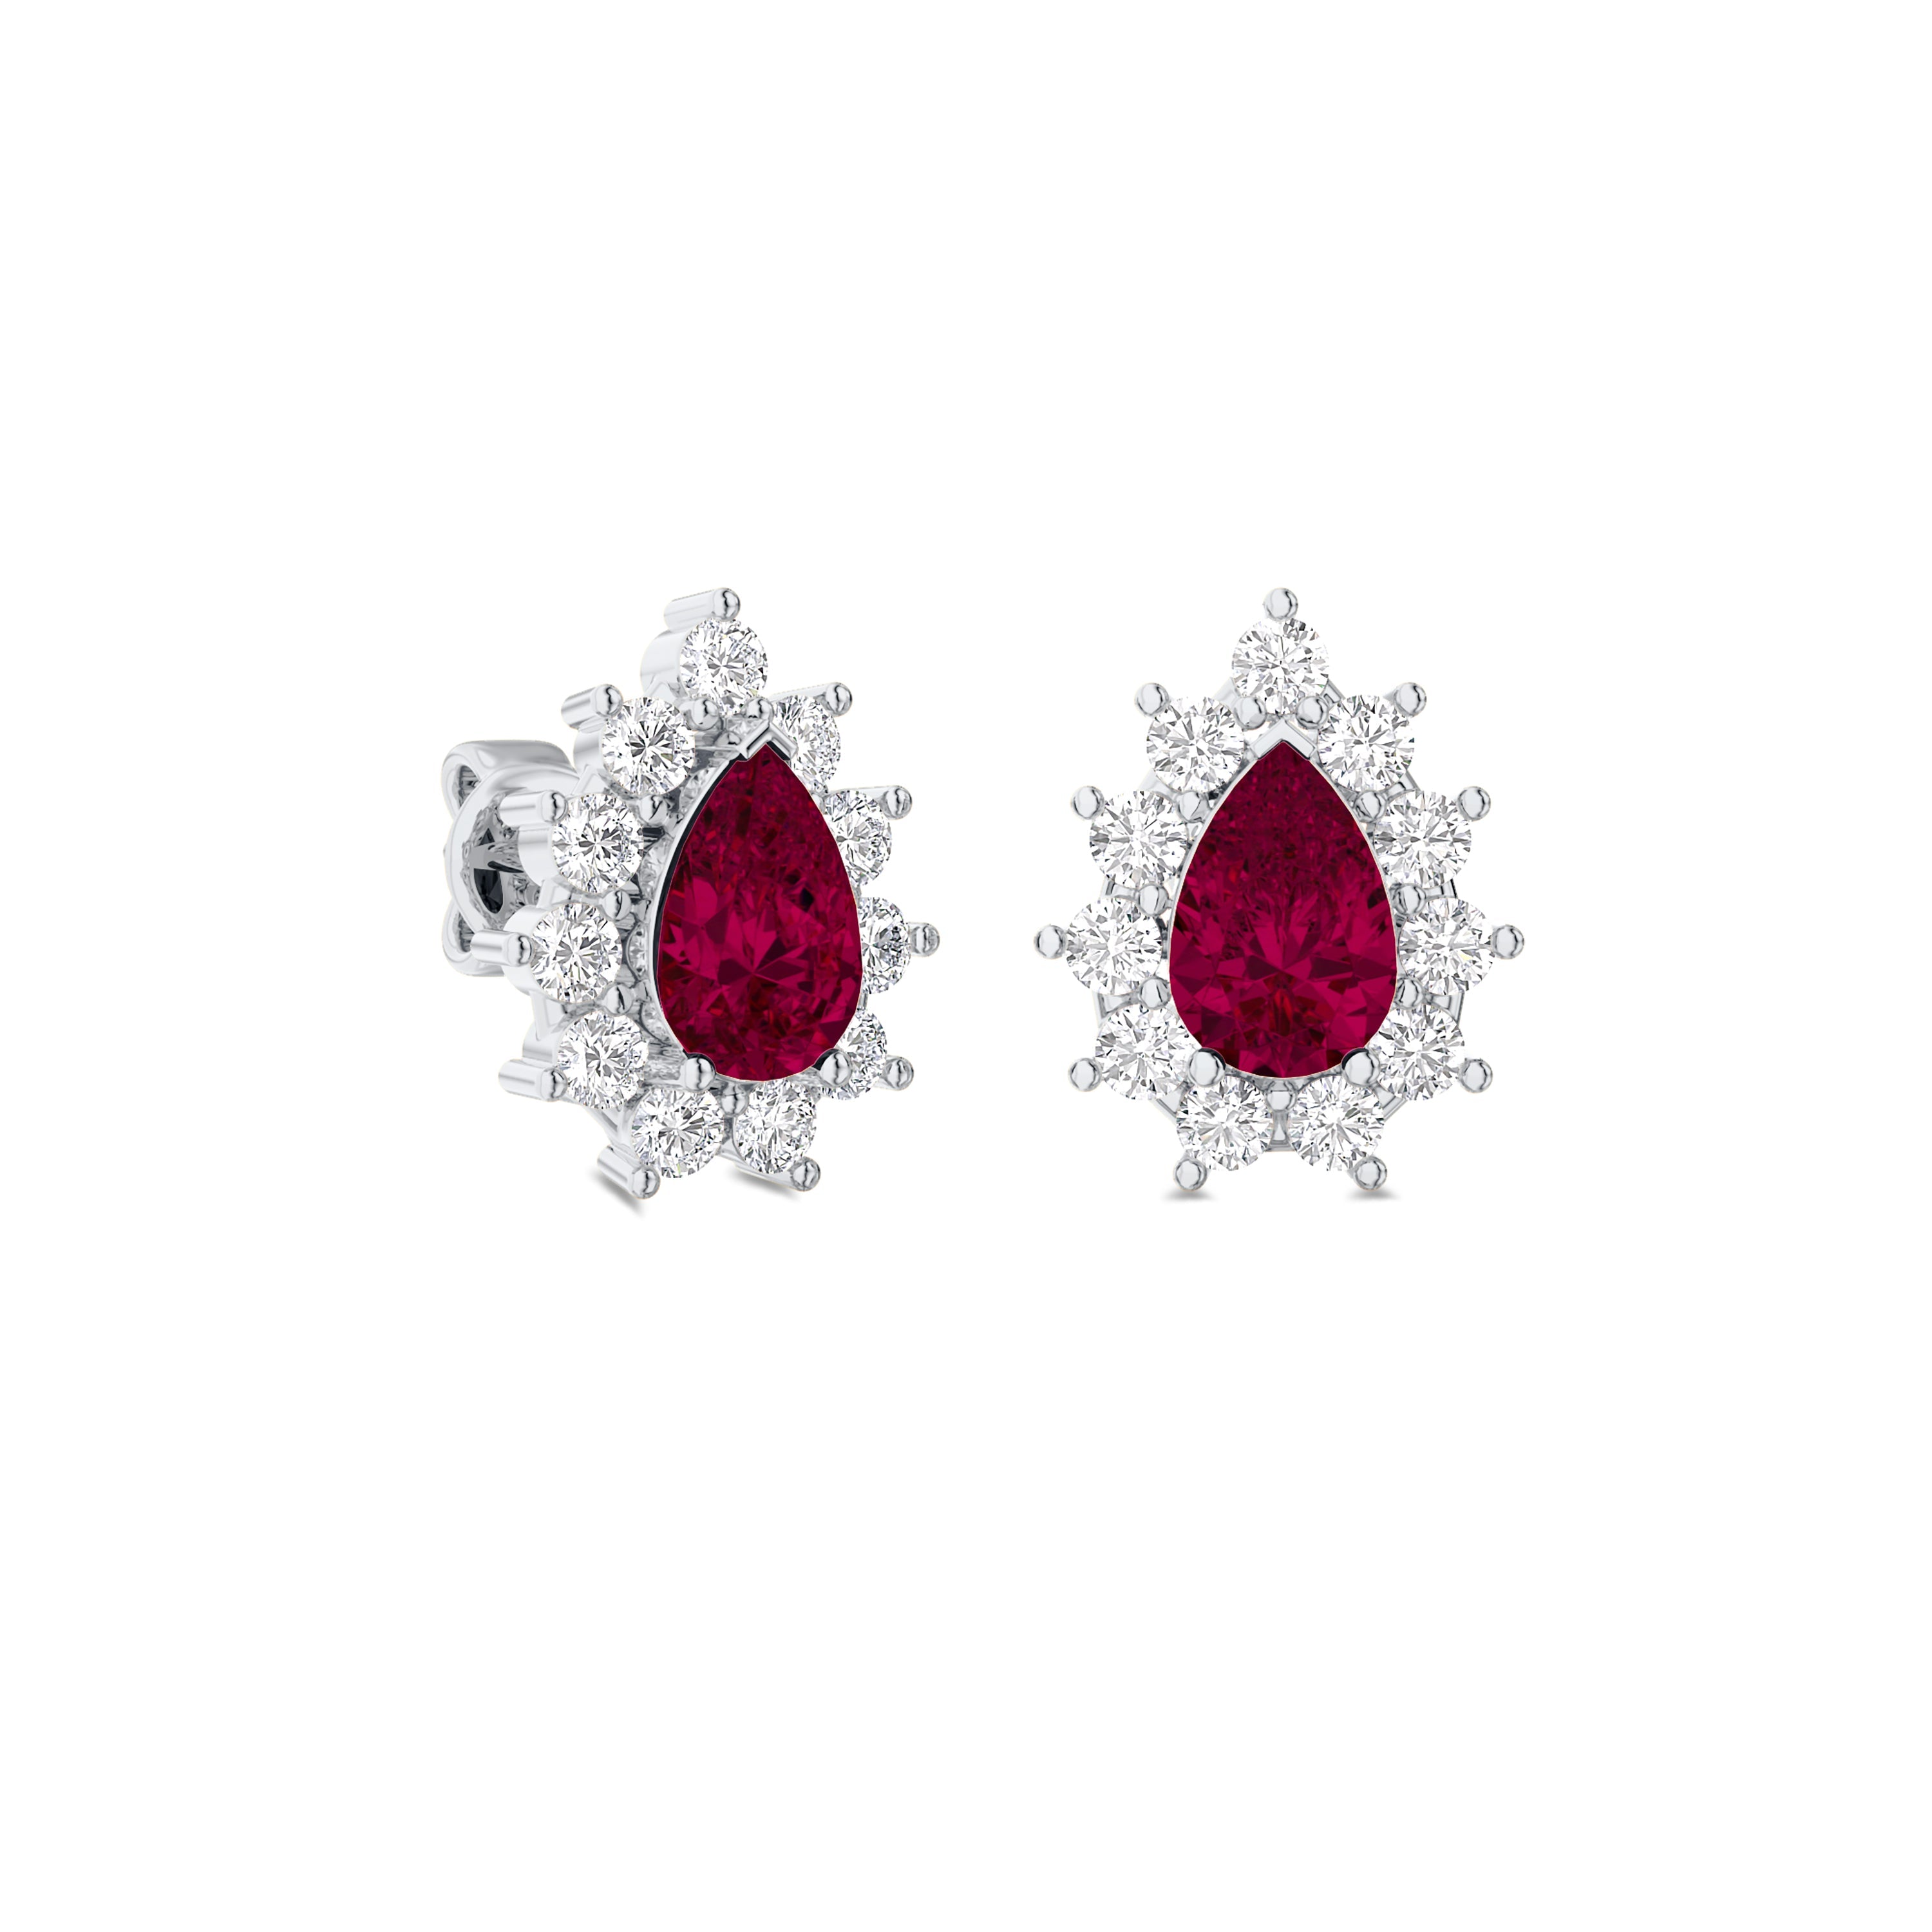 18K white gold, 0.43 carat diamond and 1.03 carat ruby earrings in FG color and SI clarity